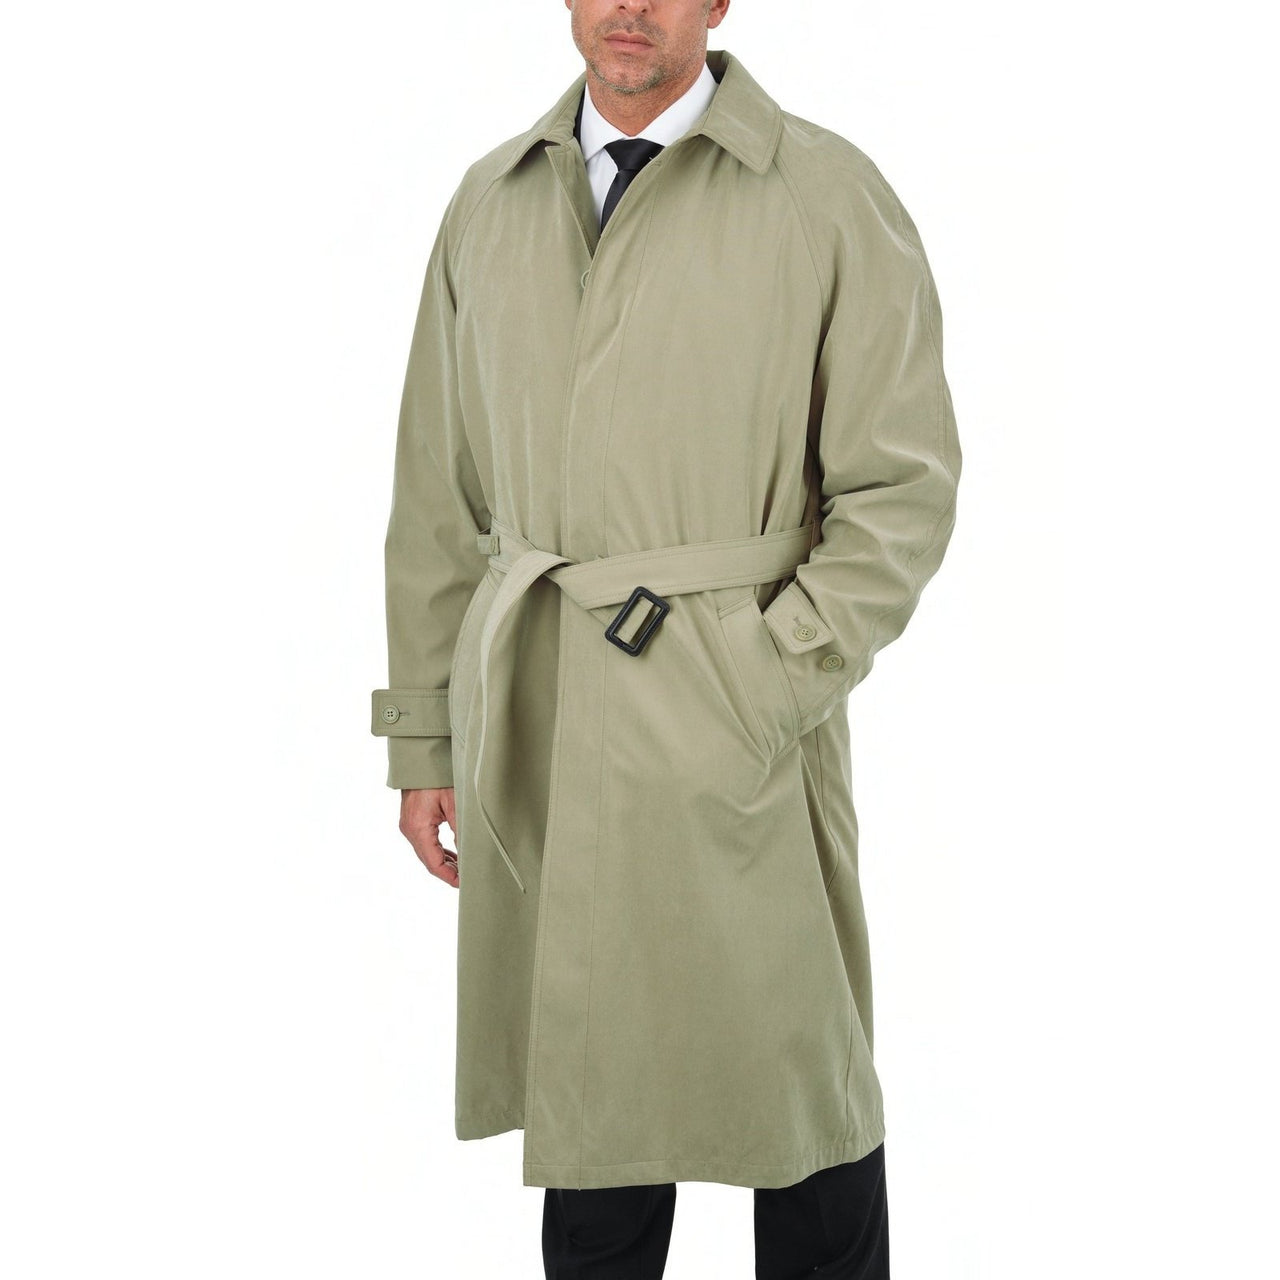 Cianni Cellini OUTERWEAR Men's Single Breasted Beige Long Trench Coat Jacket With Removable Belt & Liner